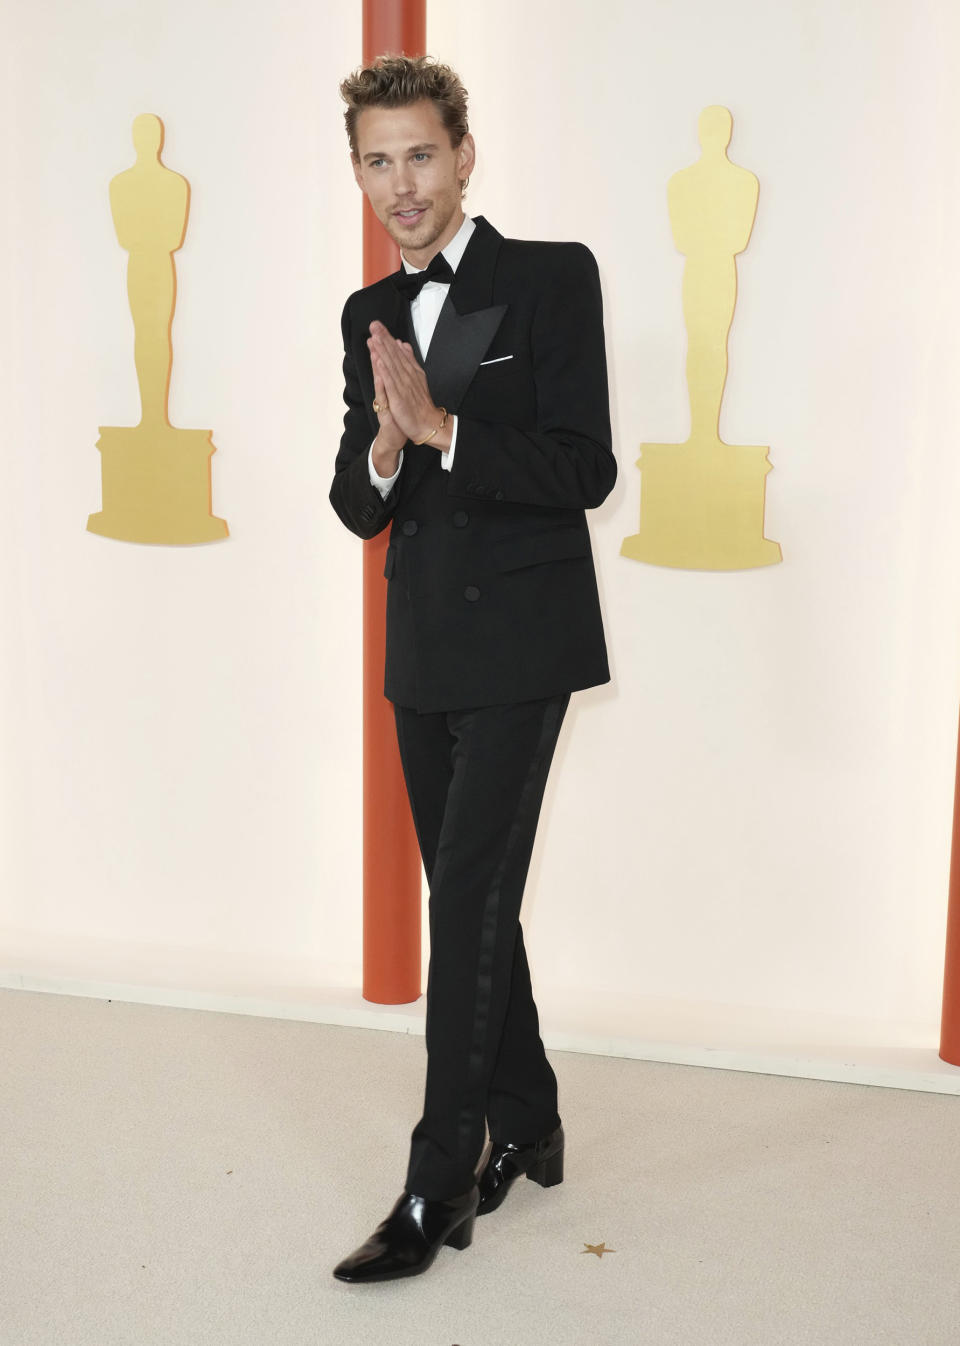 Austin Butler arrives at the Oscars on March 12, 2023 in Los Angeles, CA. (Jordan Strauss / AP)